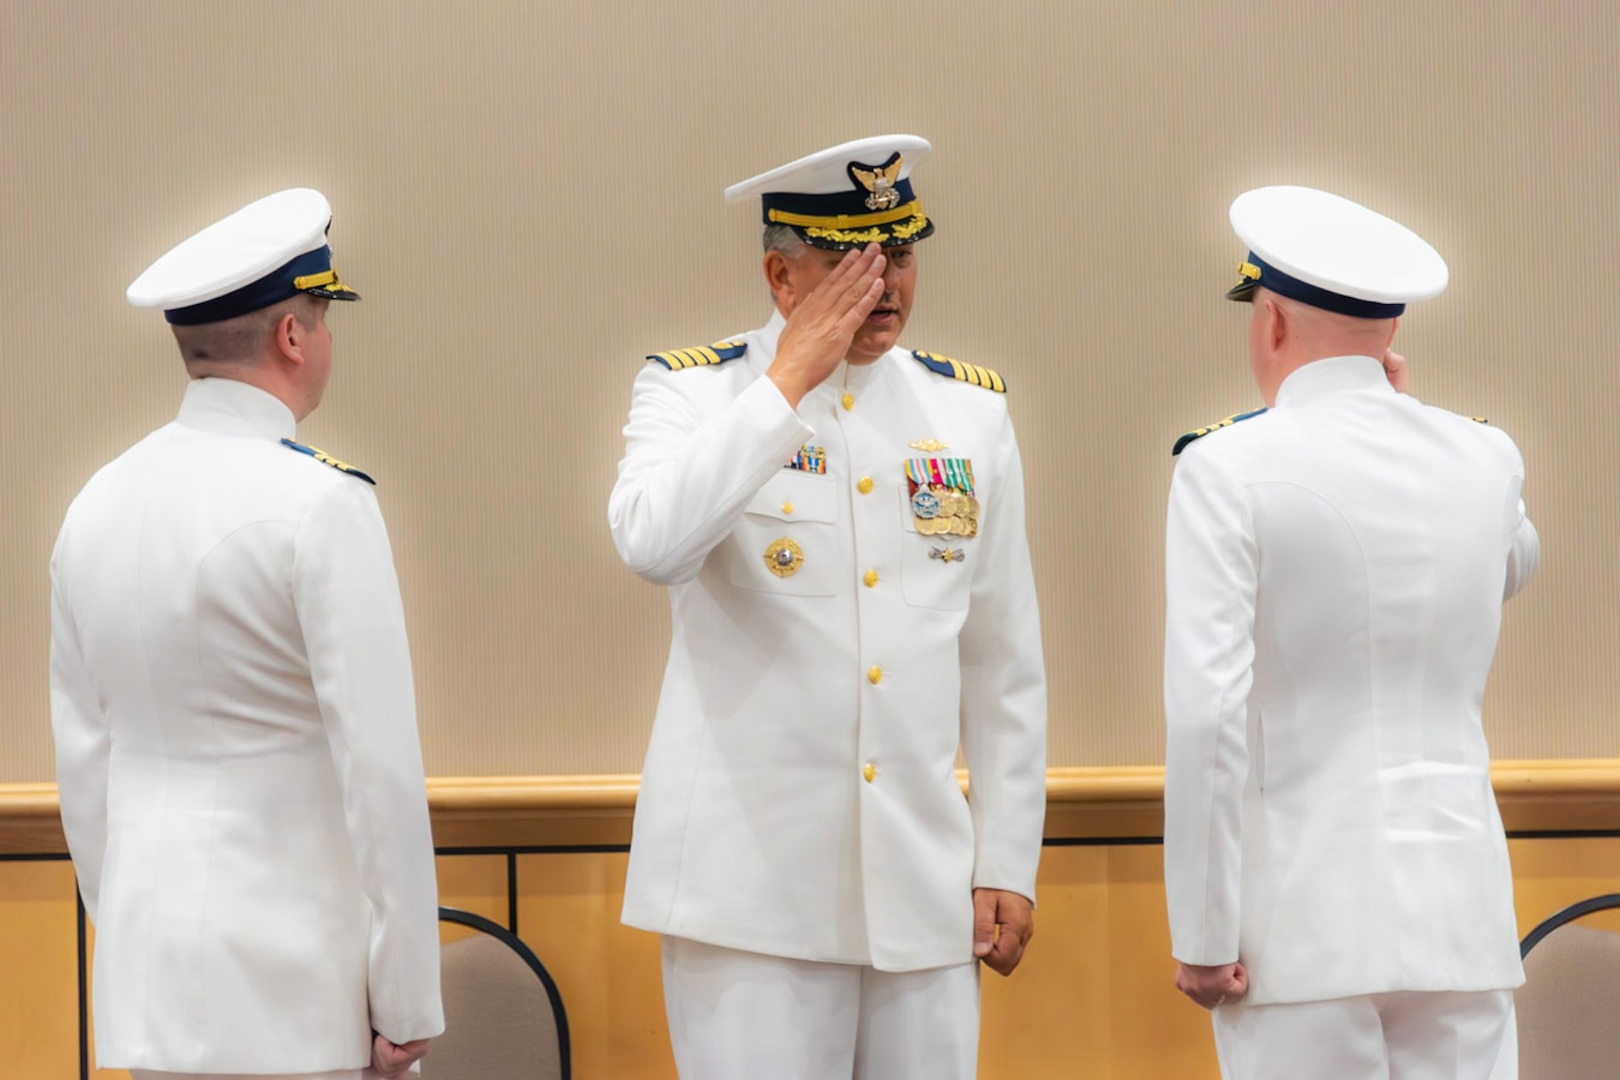 Capt. Francis J. DelRosso, Coast Guard Sector Charleston commander, Cmdr. Kevin Broyles, former Marine Safety Unit Savannah Commander, and Cmdr. Nathaniel Robinson, MSU Savannah commander, renders customs and courtesy during a change-of-command ceremony in, Savannah, Georgia, July 13, 2023. MSU Savannah has a crew of 57 active duty, reserve, and civilian personnel that safeguards 116 miles of sensitive shoreline along the Georgia coast and covers 95 % of all navigable waterways in Georgia. (U.S. Coast Guard courtesy photo)